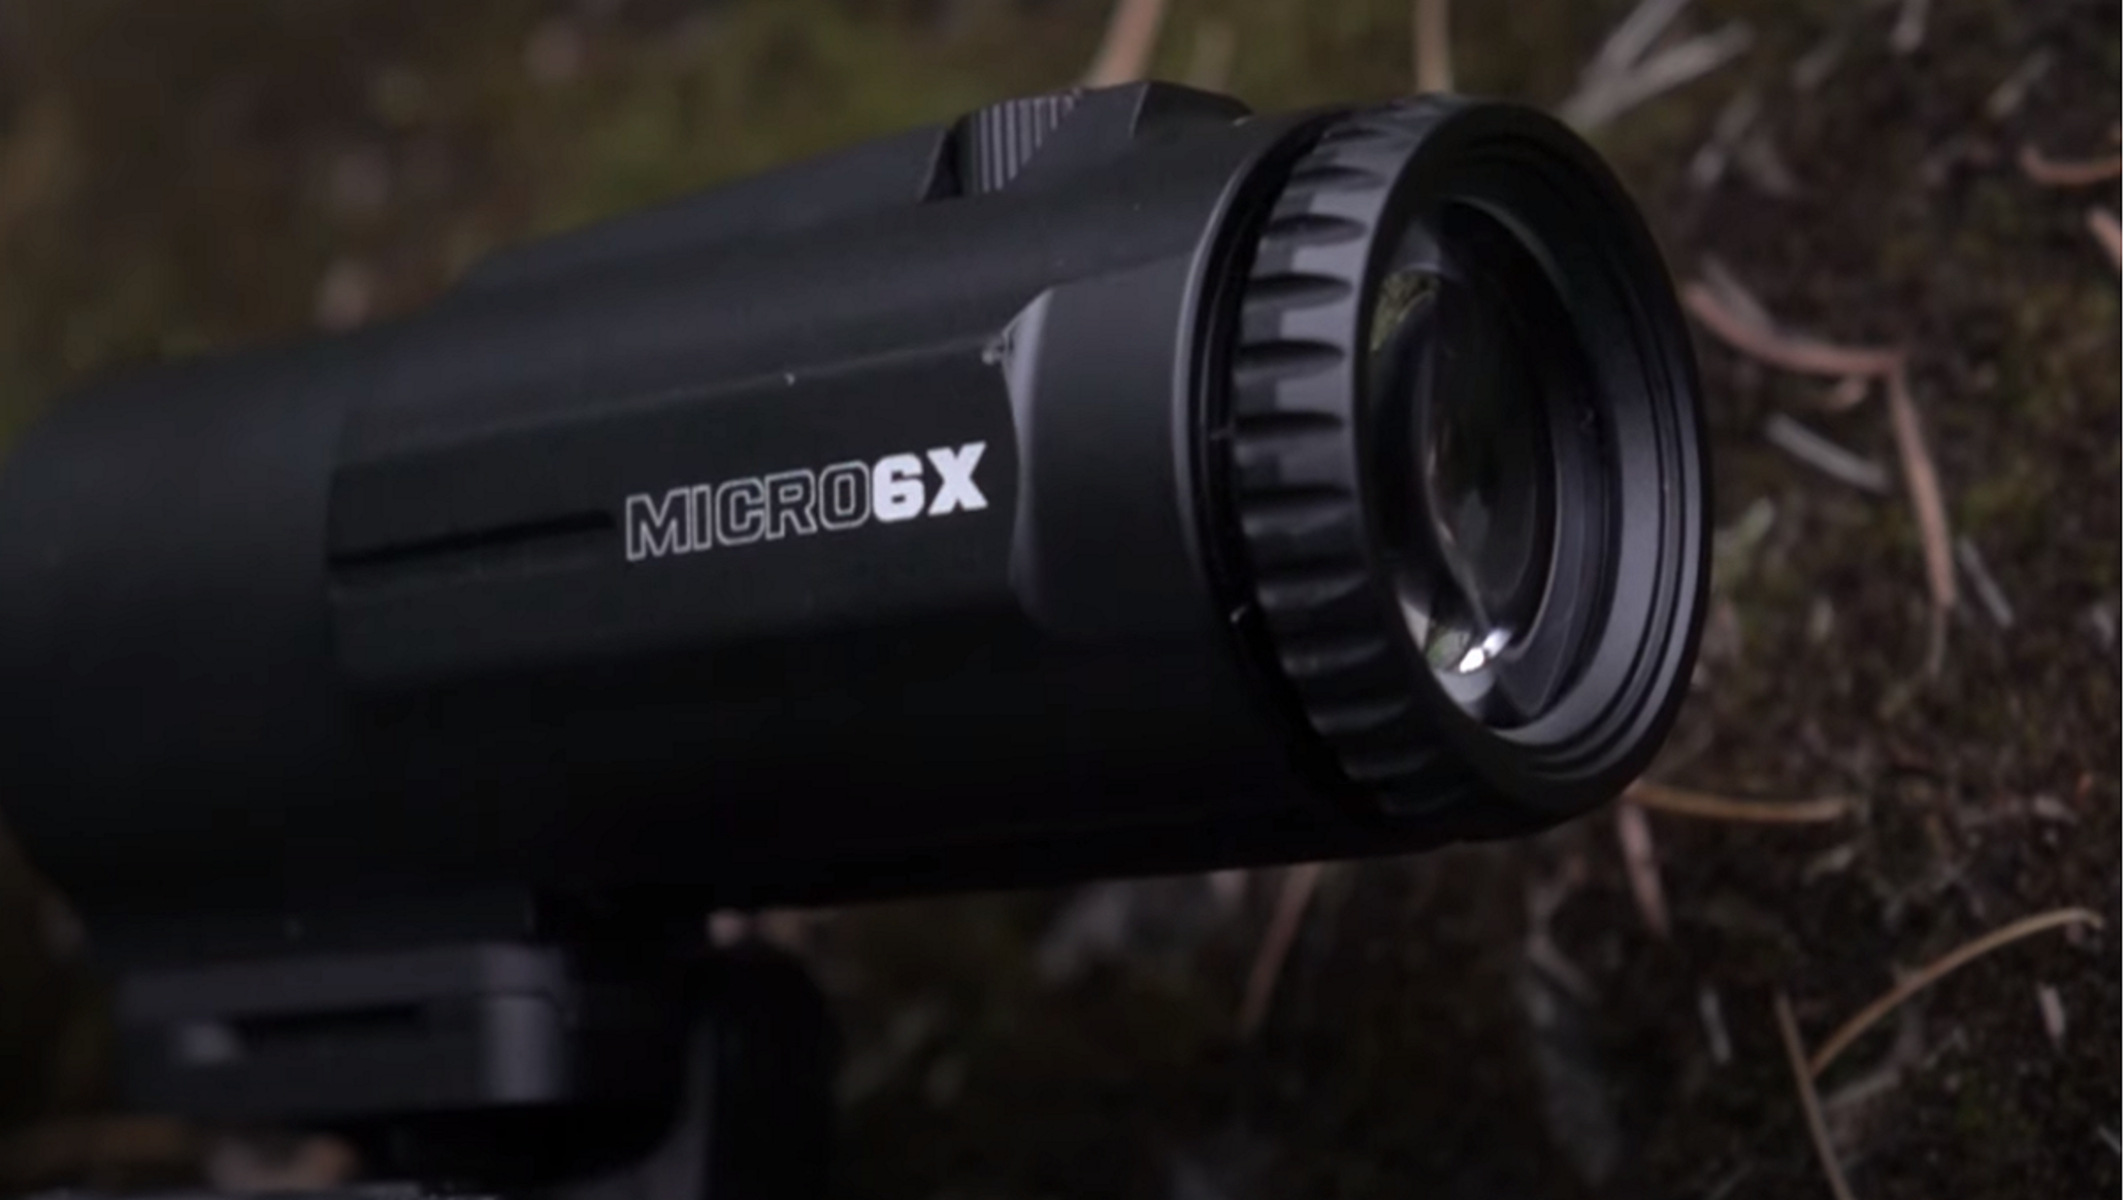 Vortex Magnifier Compatibility: Products That Pair Well